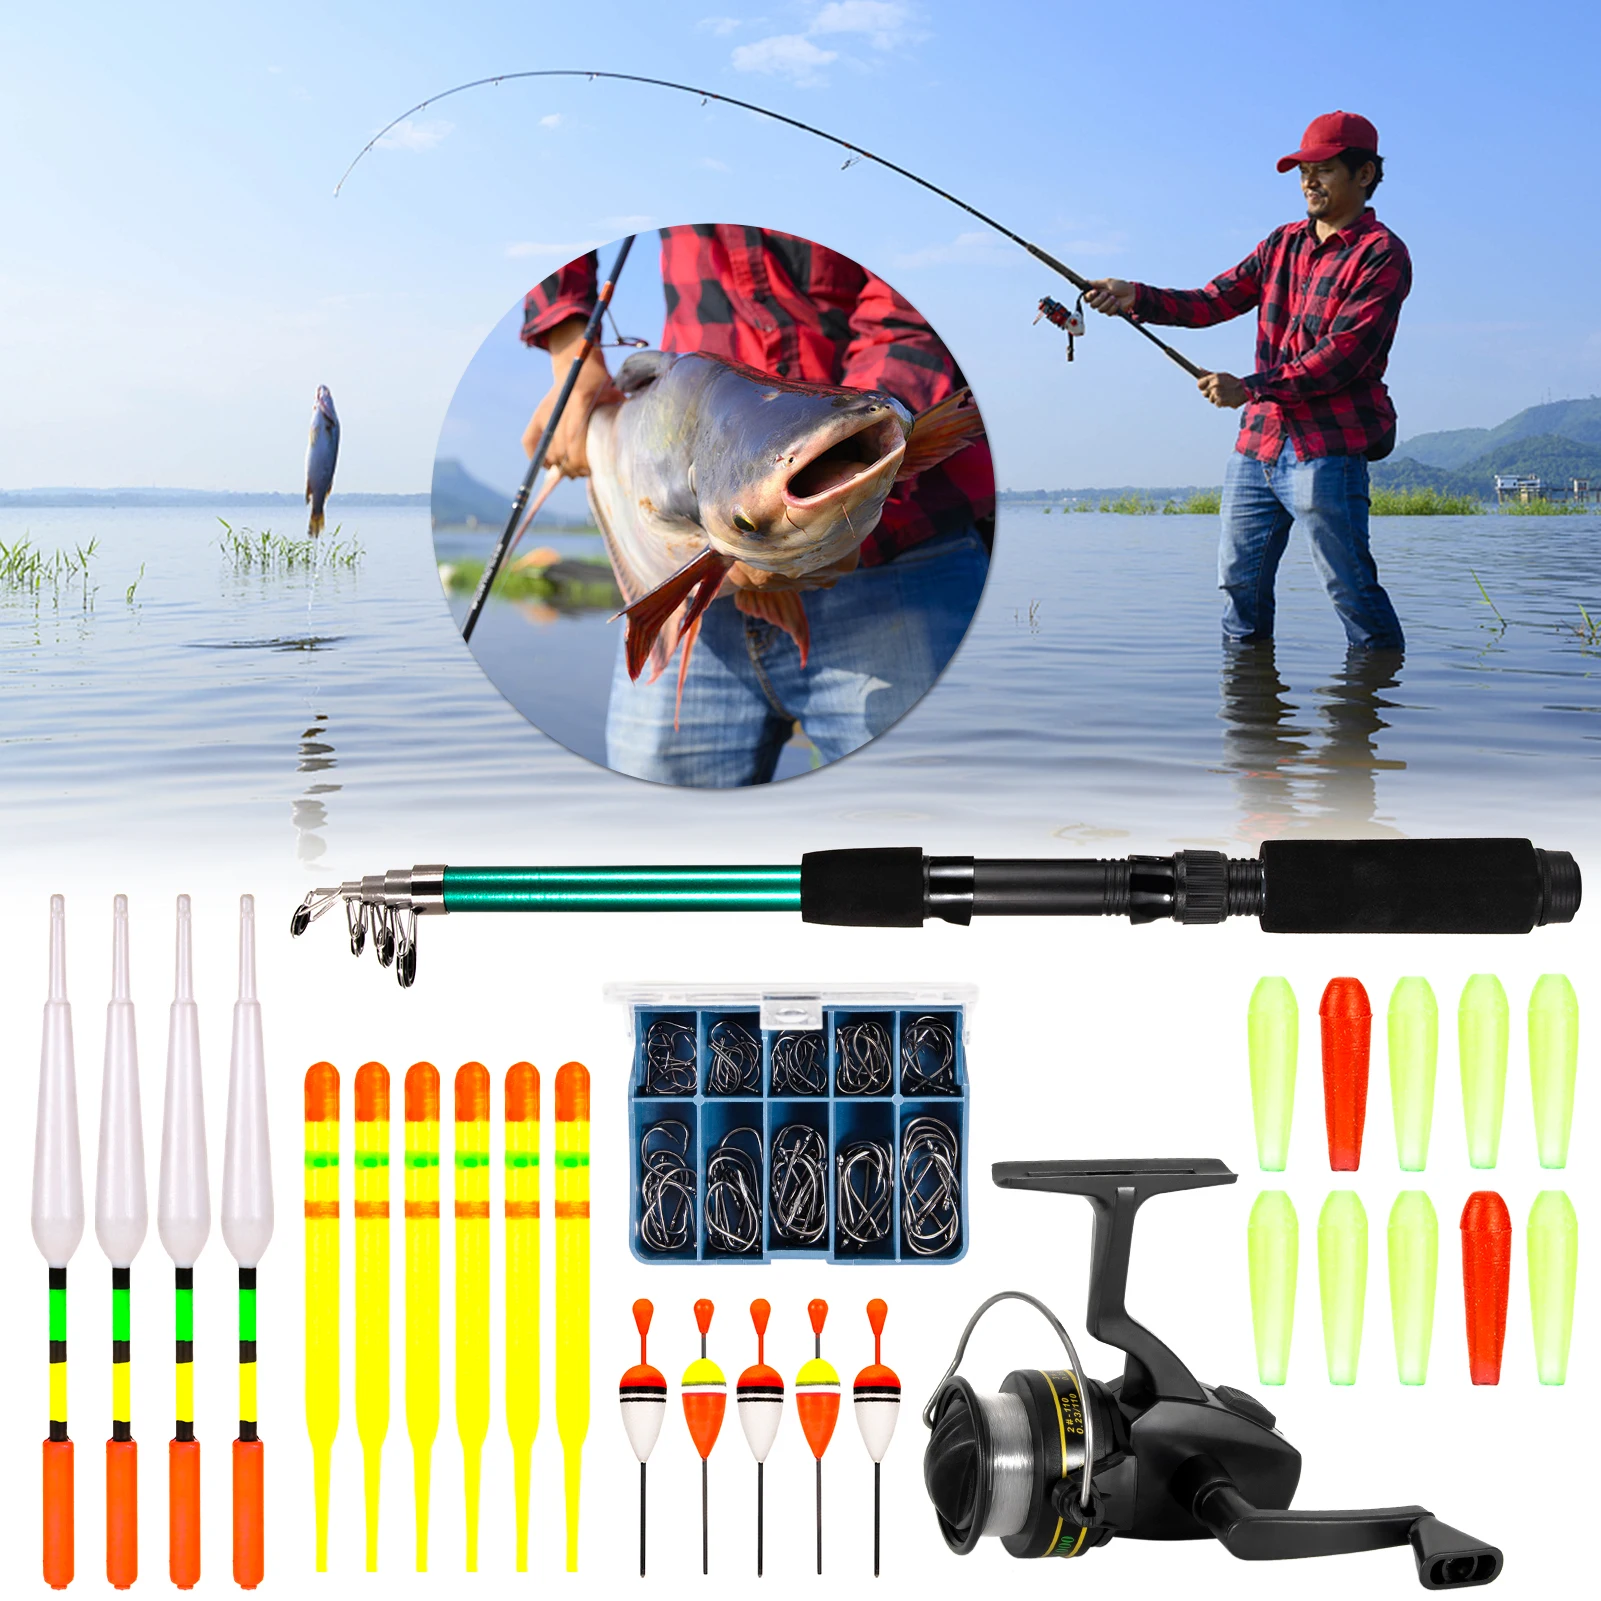 Owsoo Fishing Rod and Reel Combo 127pcs Fishing Tackle Set Telescopic Fishing Rod Pole with Reel Floats Hooks Accessories, Size: 127pcs Set